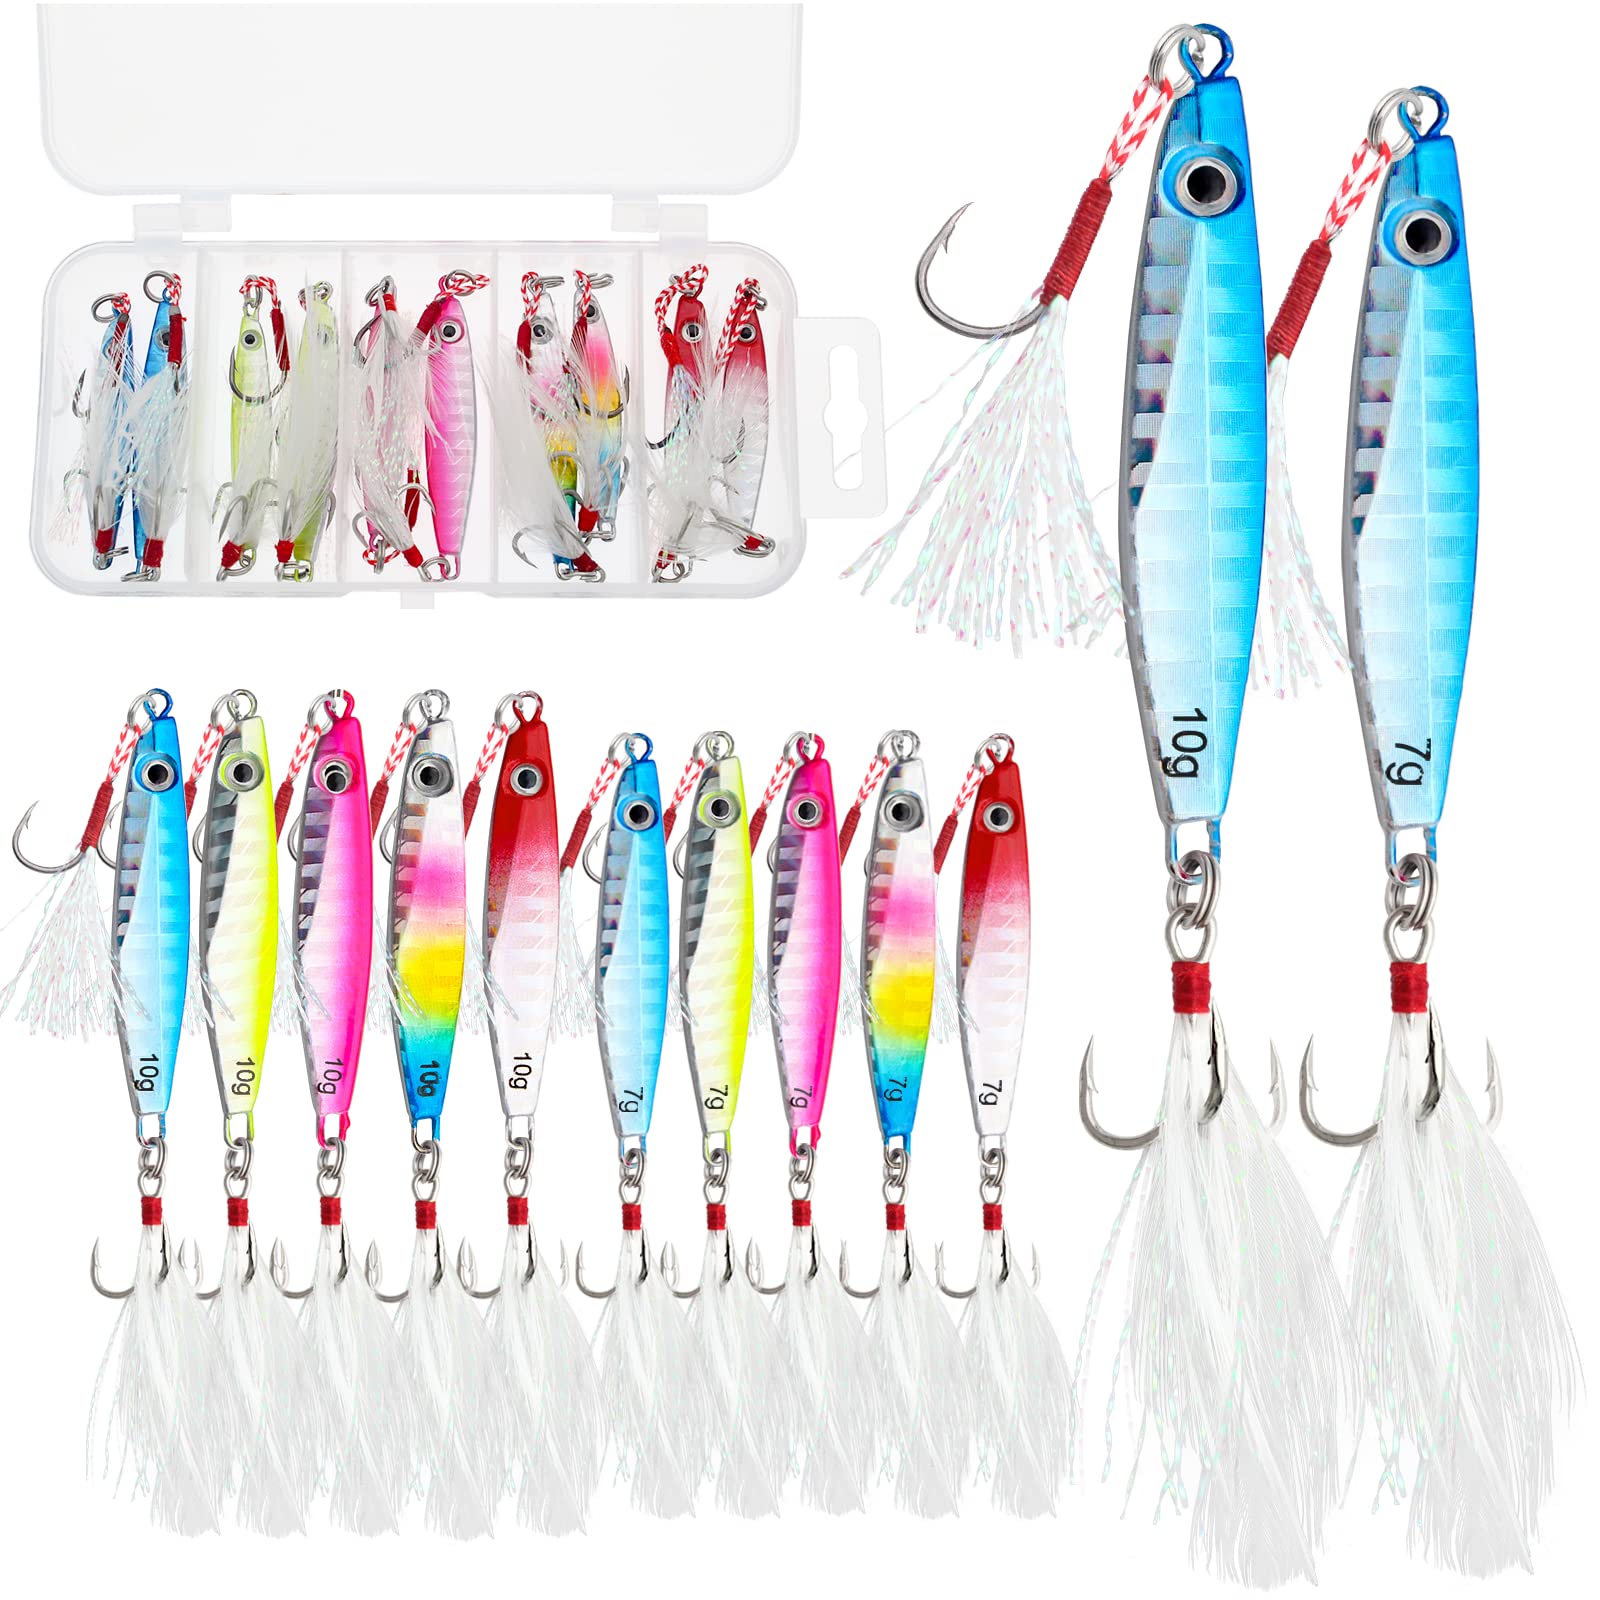 Fishing Jigs Metal Fishing Spoons Lures, Blade Bait Spinner Long Casting  Jigging Spoon Lure Vertical Hard VIB Swimbait for Walleye Bass Trout  Freshwater & Saltwater A-10pcs 0.25oz & 0.35oz